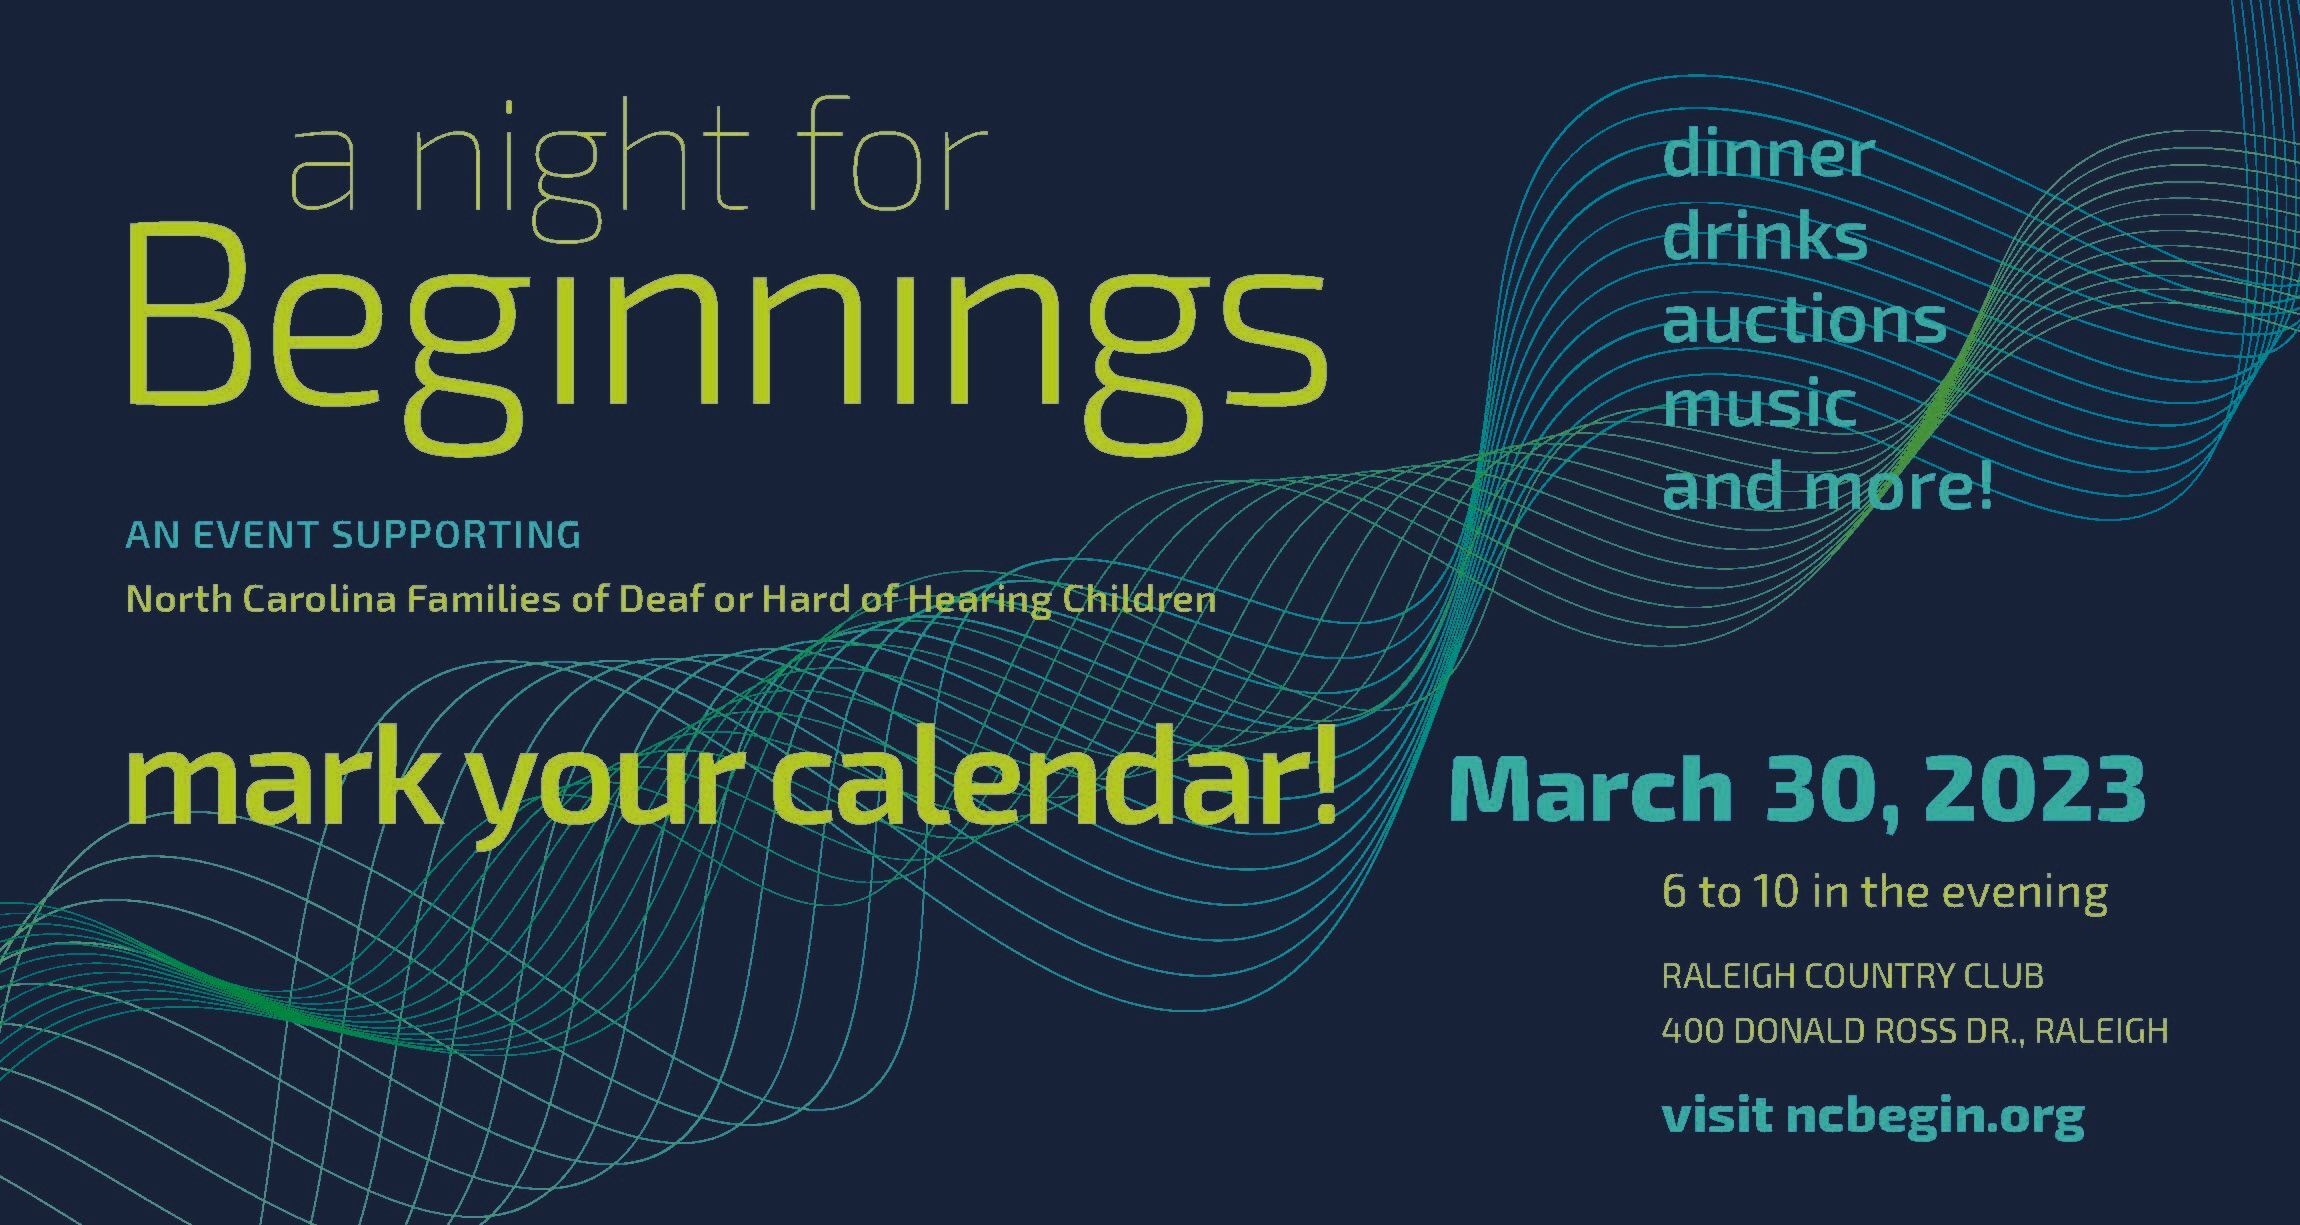 join us for a night of dinner + drinks along with sounds from